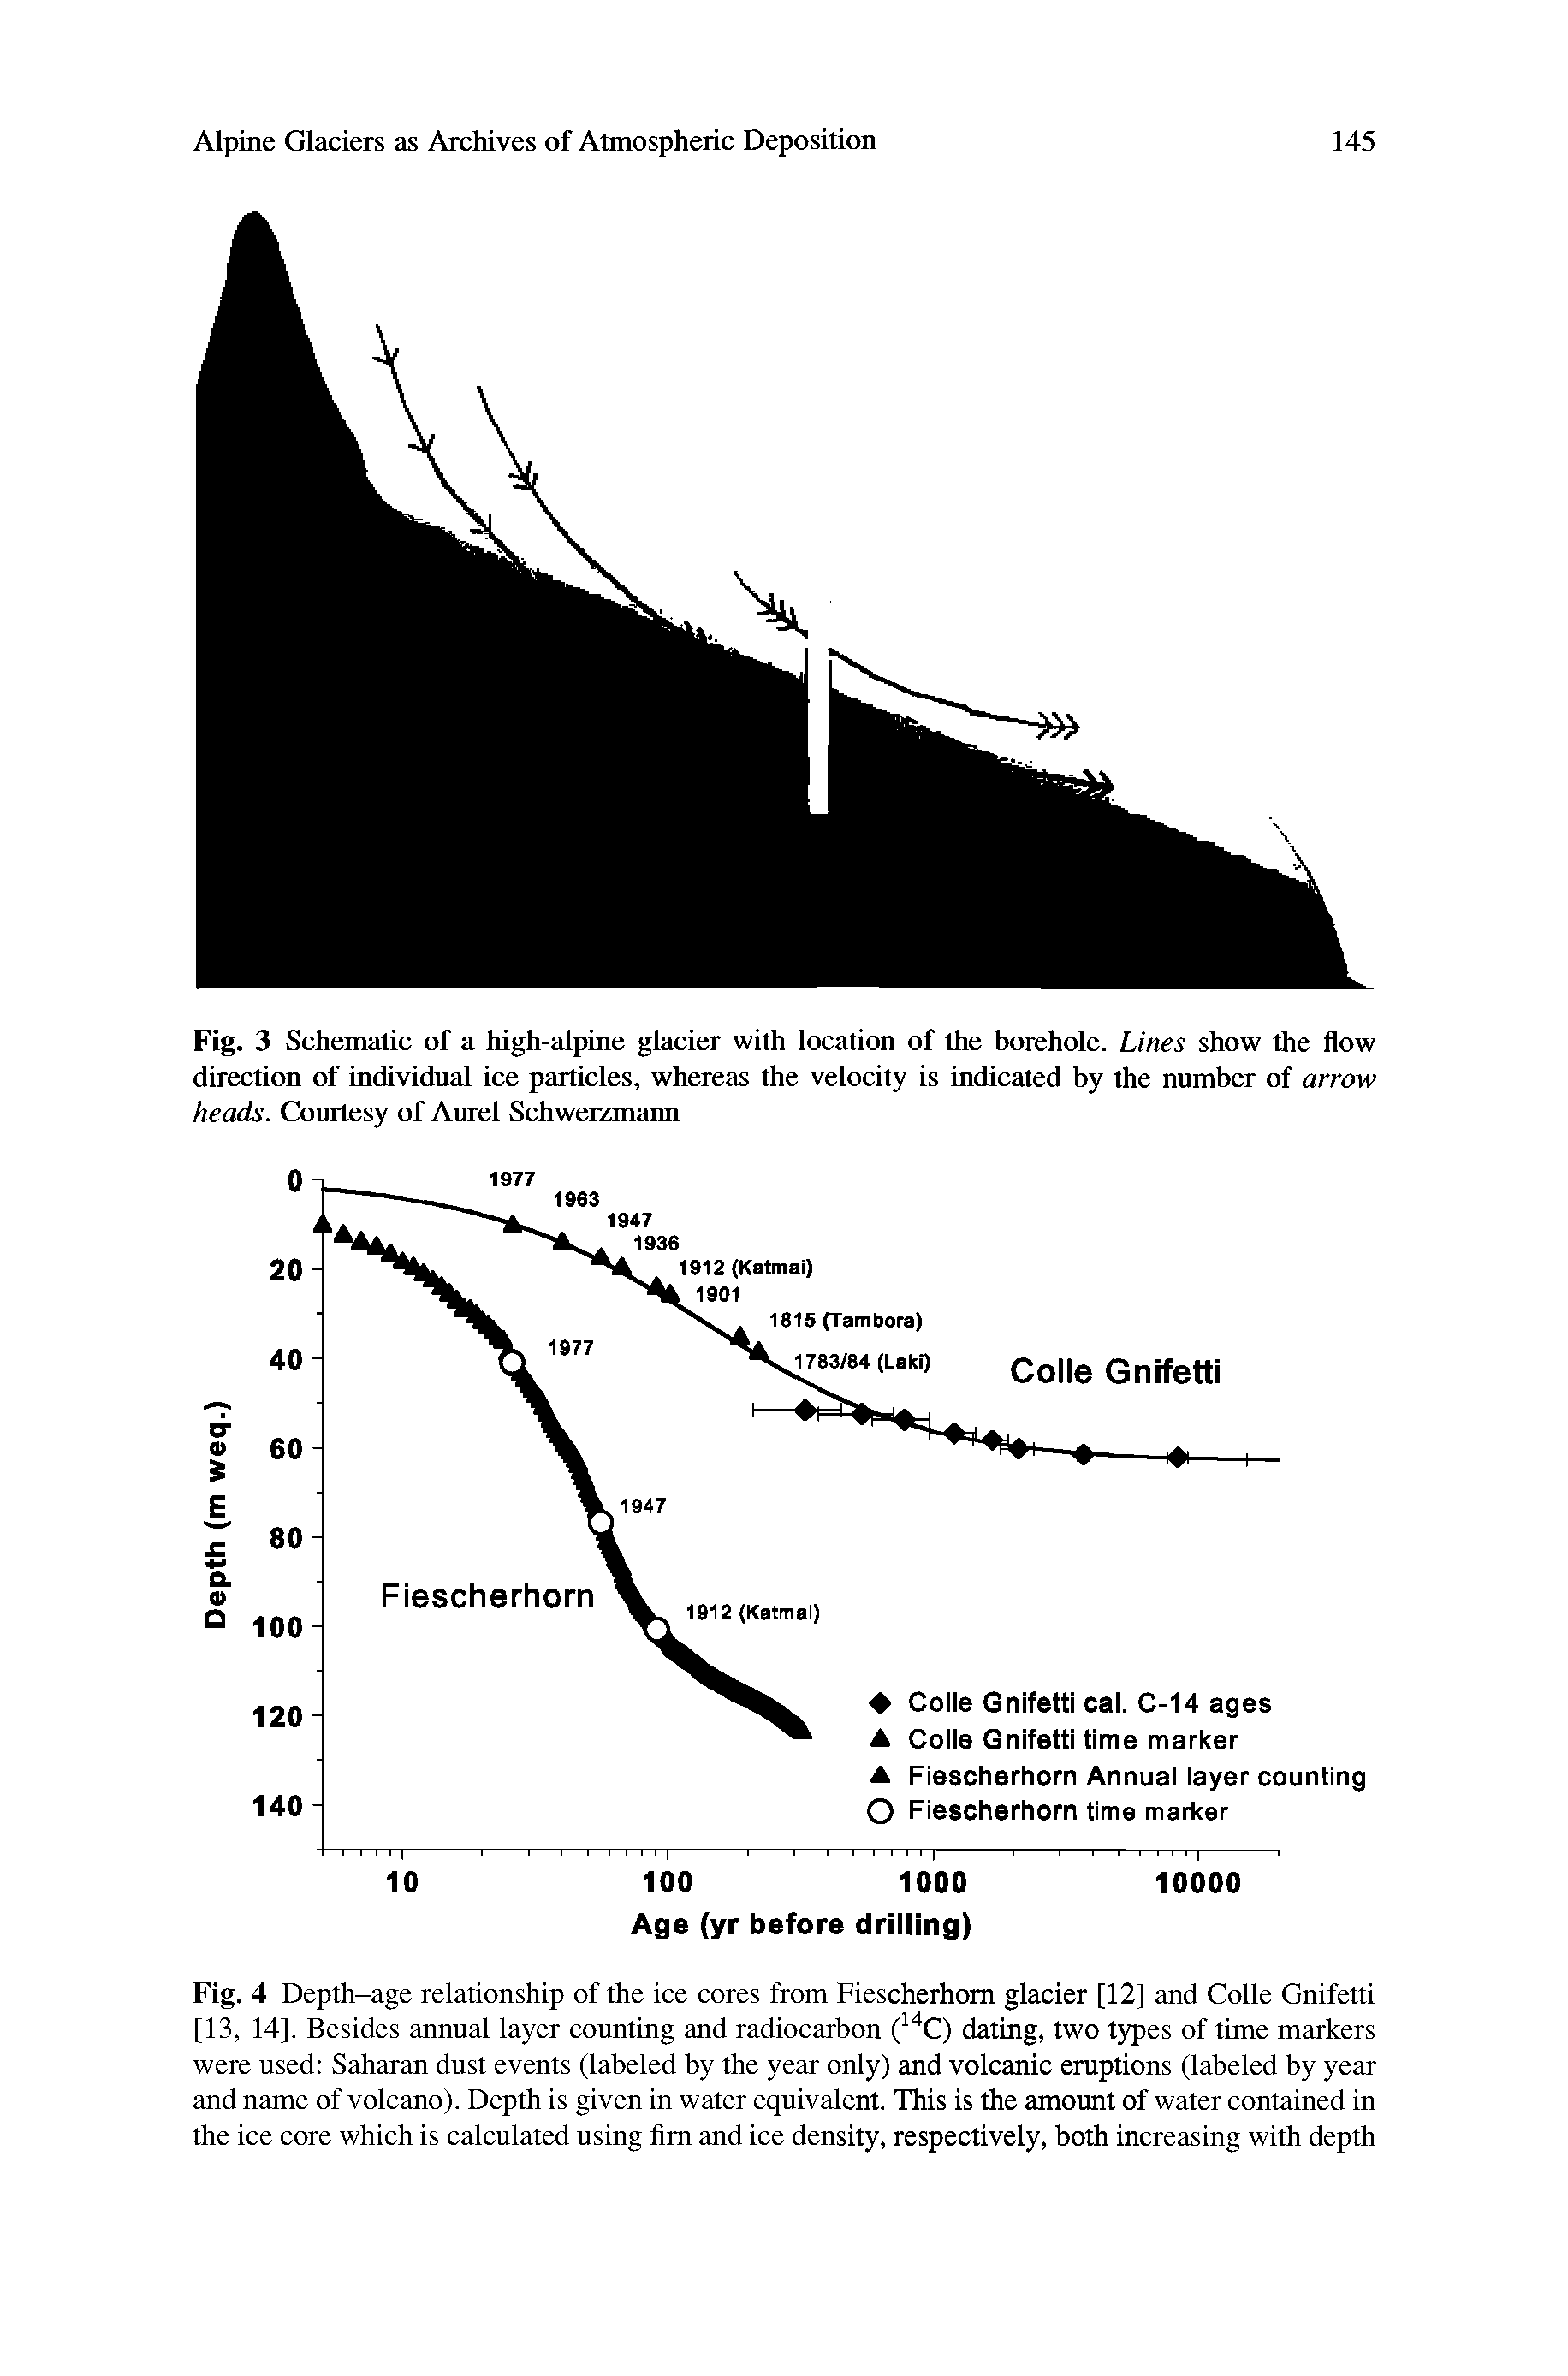 Fig. 3 Schematic of a high-alpine glacier with location of the borehole. Lines show the flow direction of individual ice particles, whereas the velocity is indicated by the number of arrow heads. Courtesy of Aurel Schwerzmann...